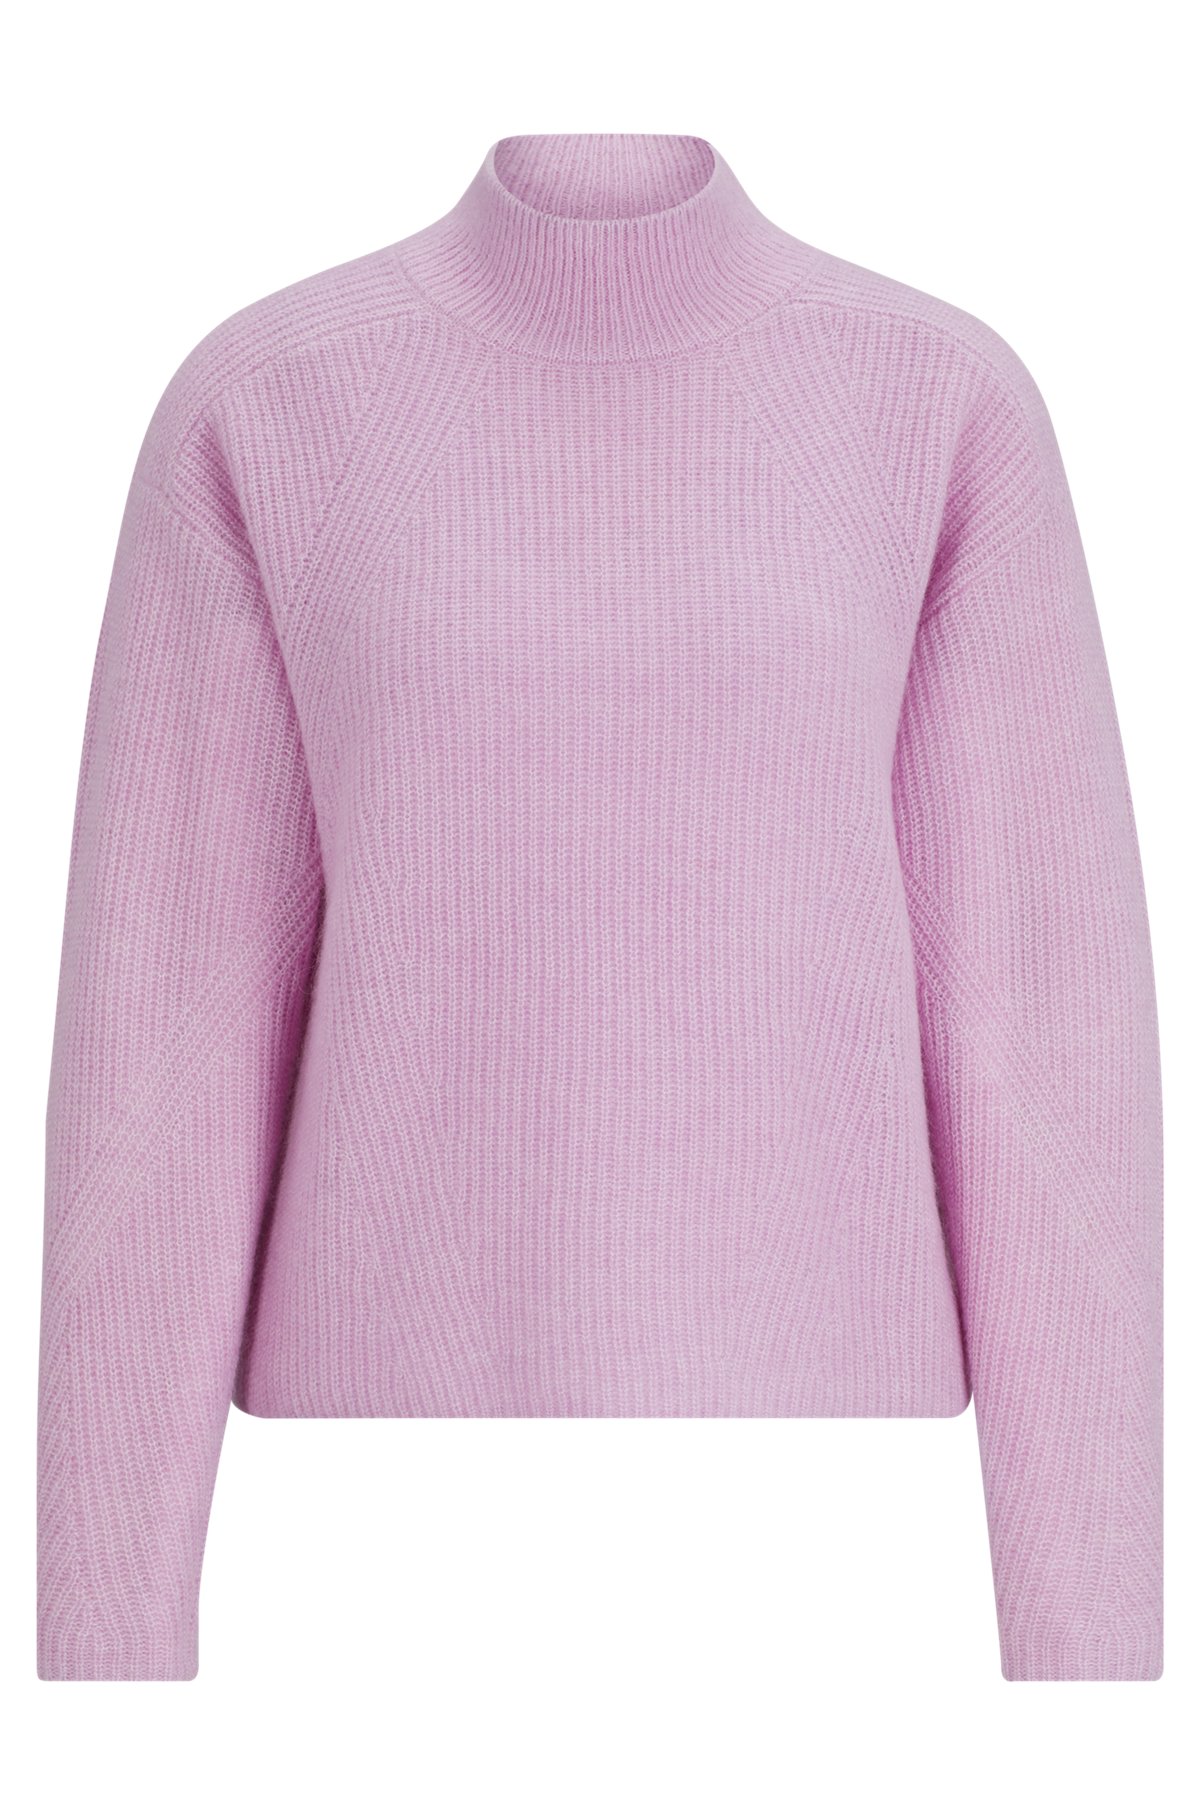 Knitted sweater with mock neckline, light pink